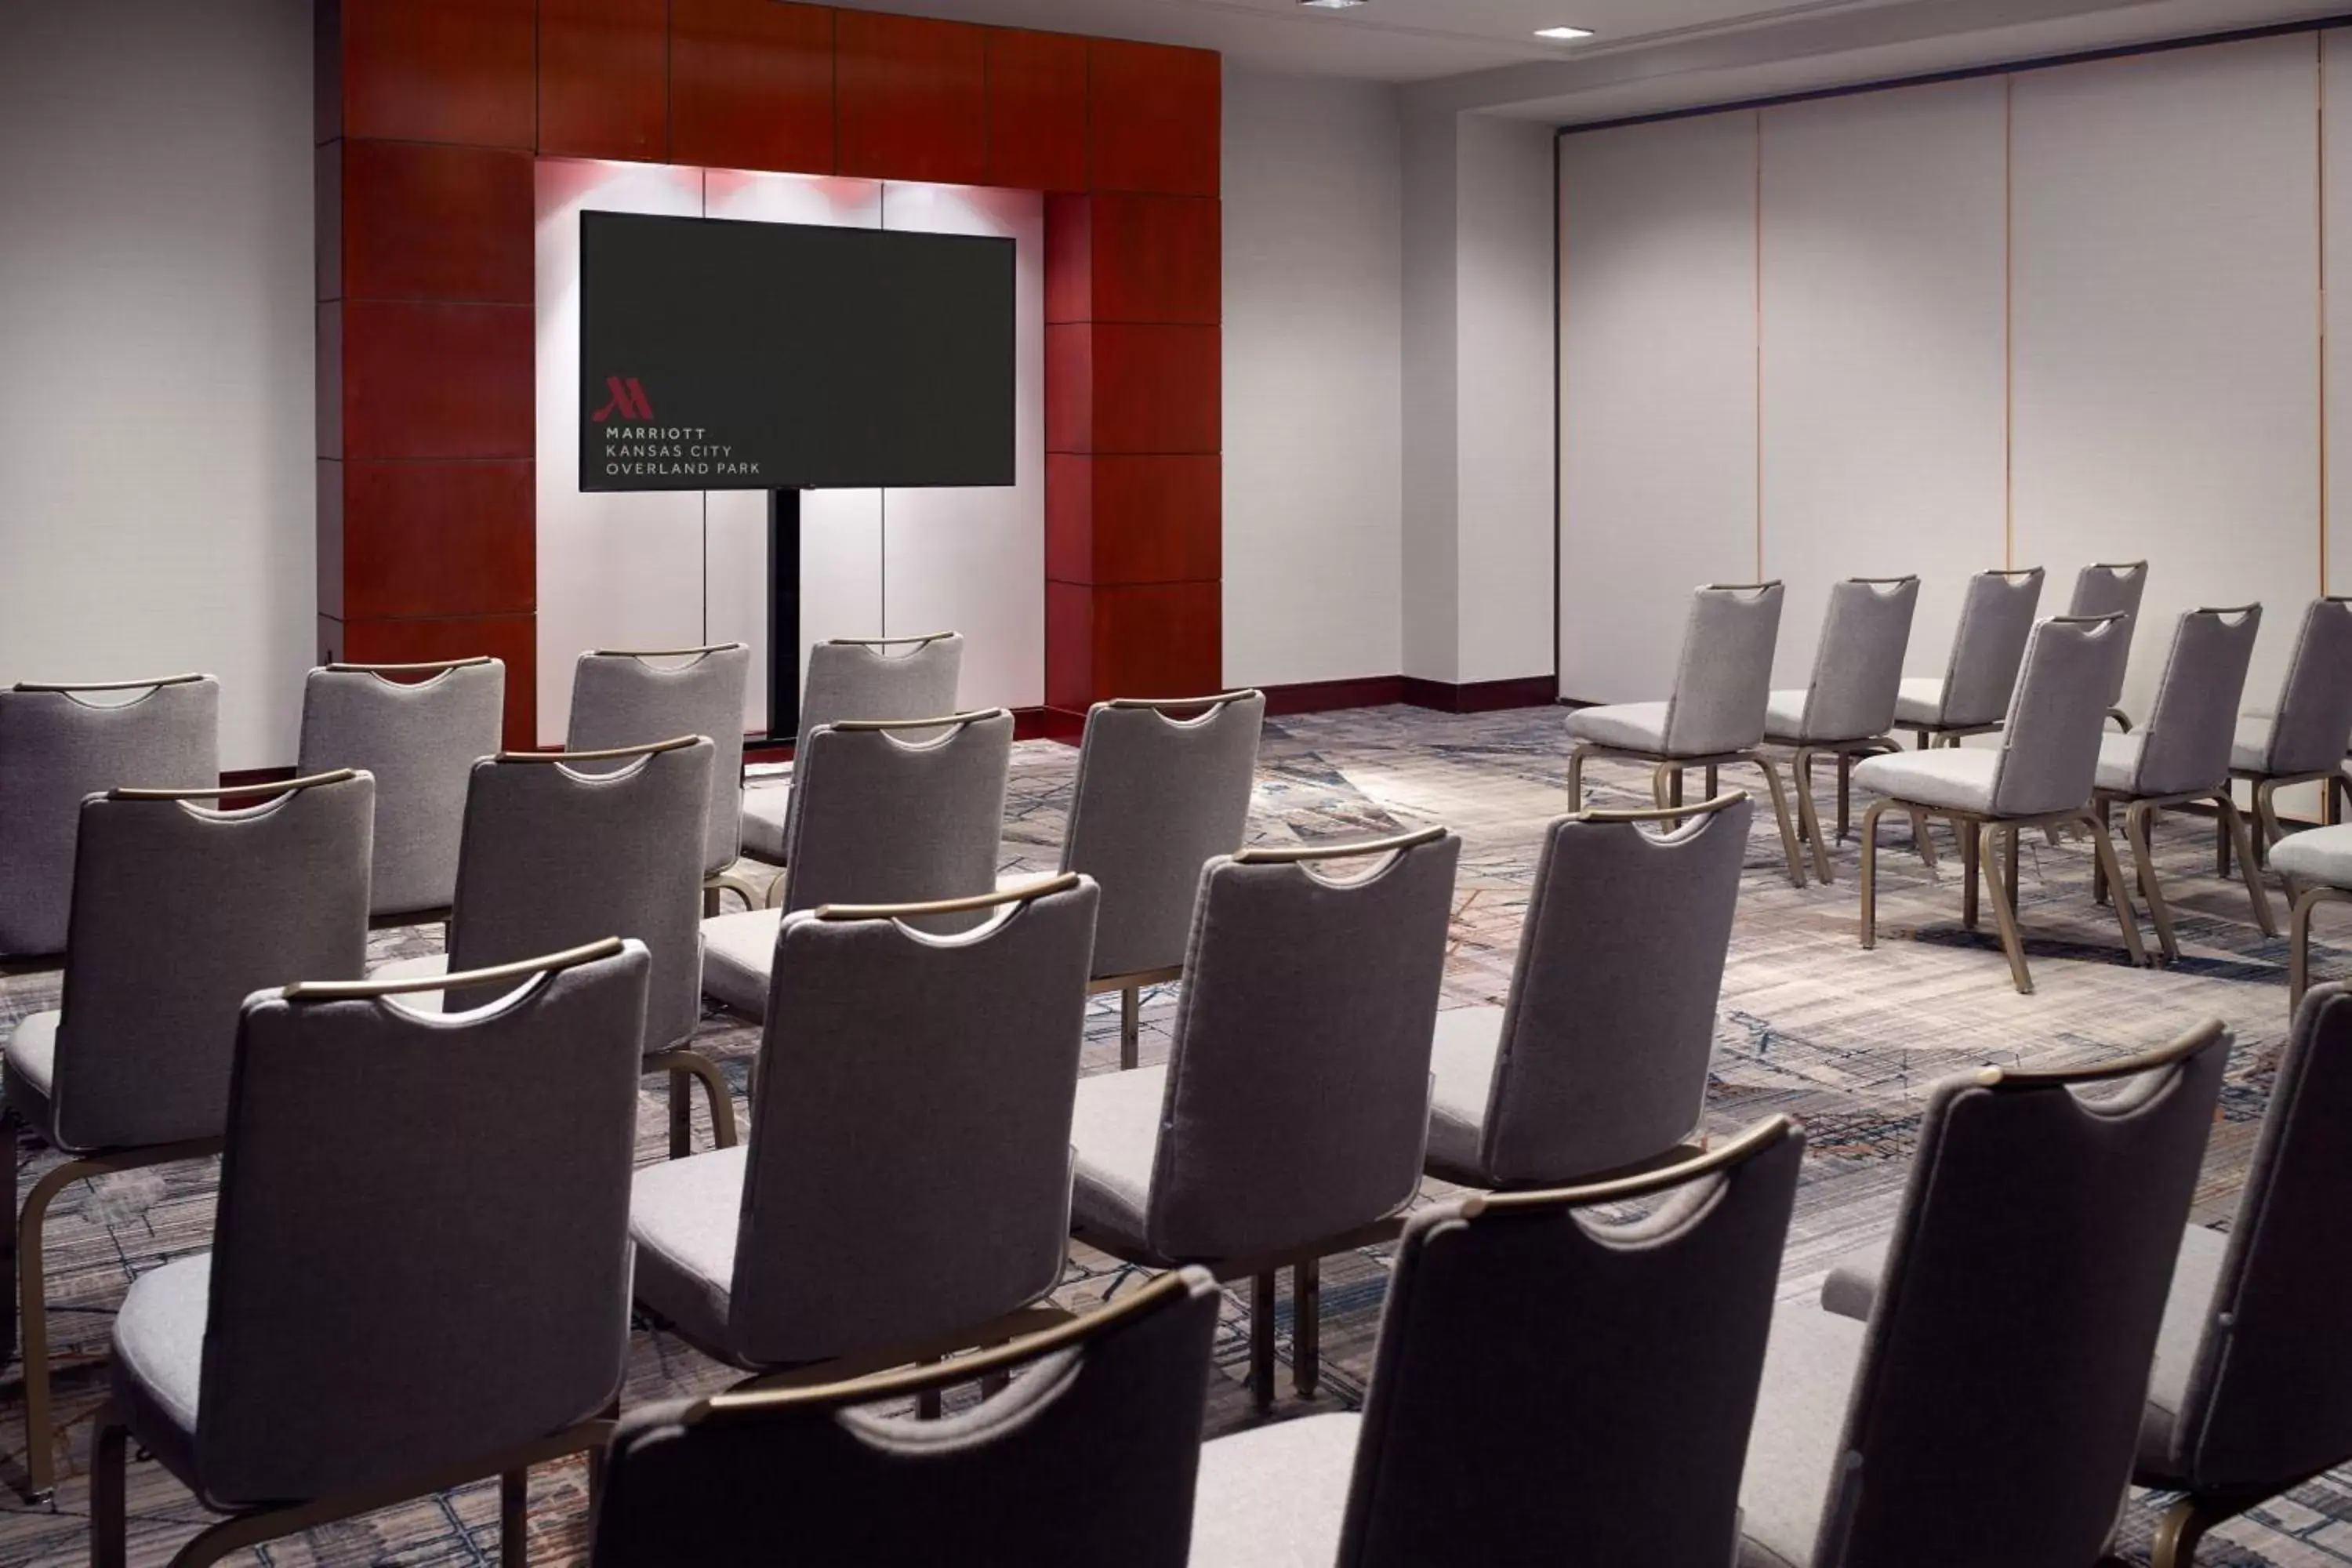 Meeting/conference room in Marriott Kansas City Overland Park